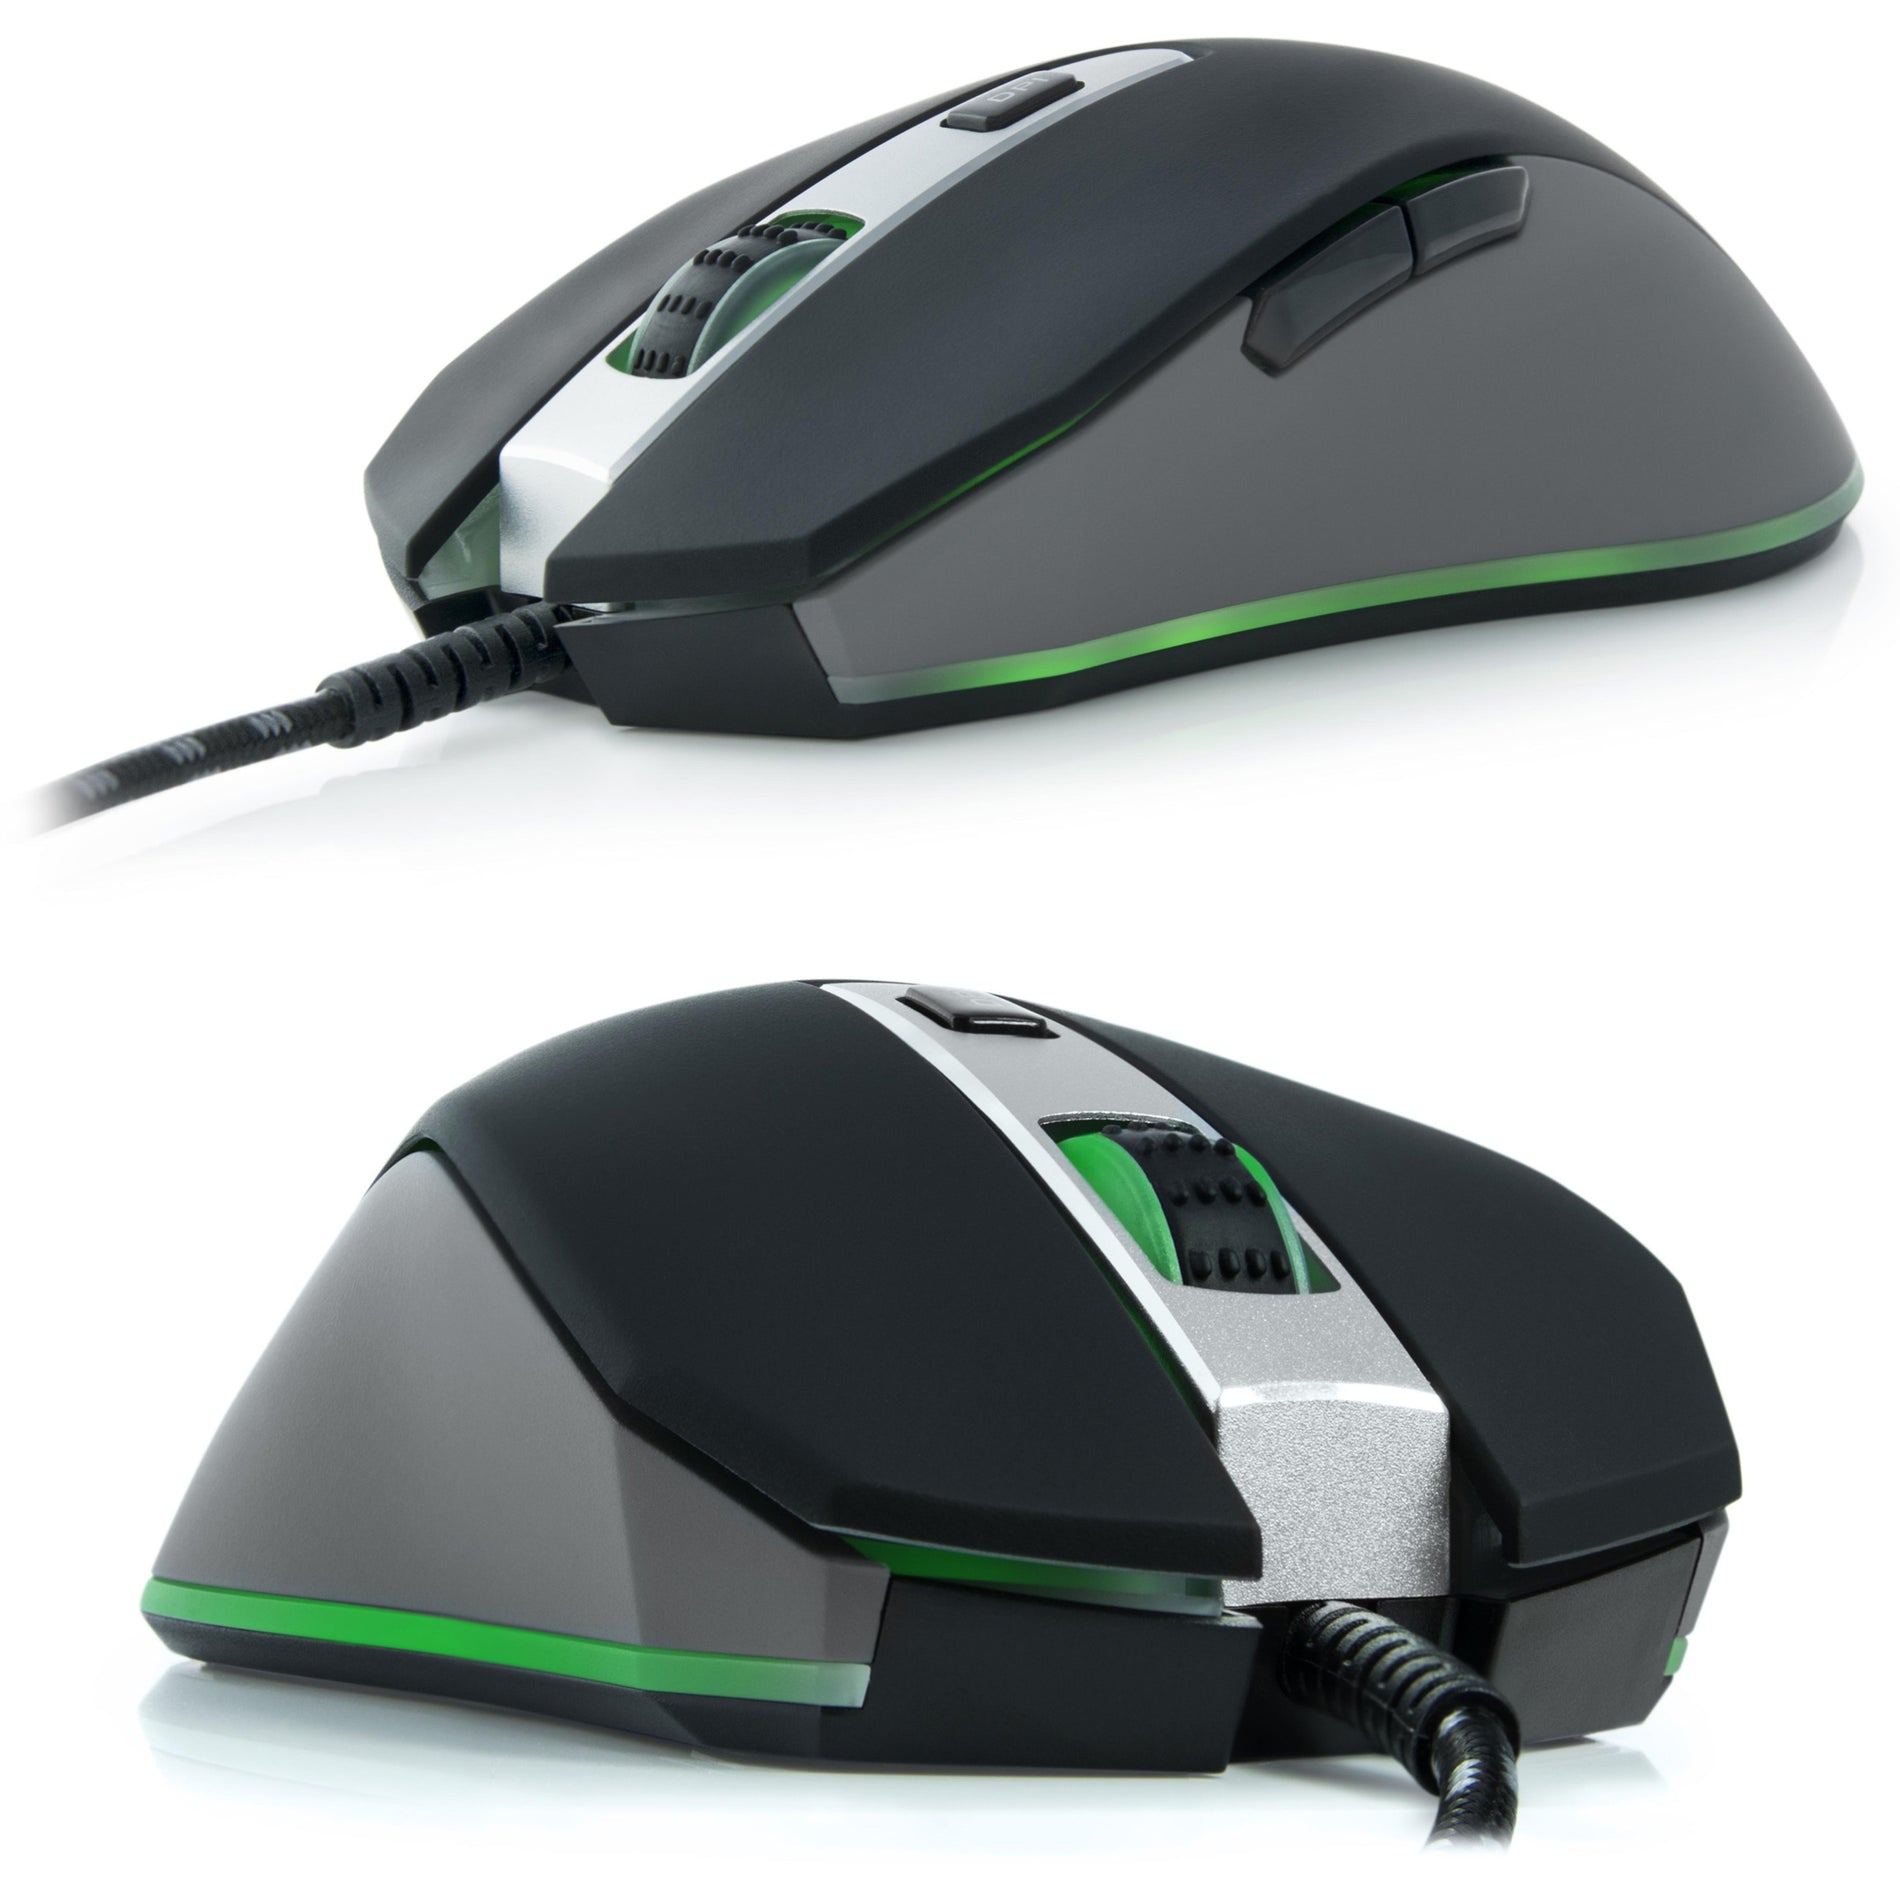 Plugable USB-PM3360 Performance Gaming Mouse, Ergonomic Fit, 3200 DPI, 6 Buttons, Plug-and-Play